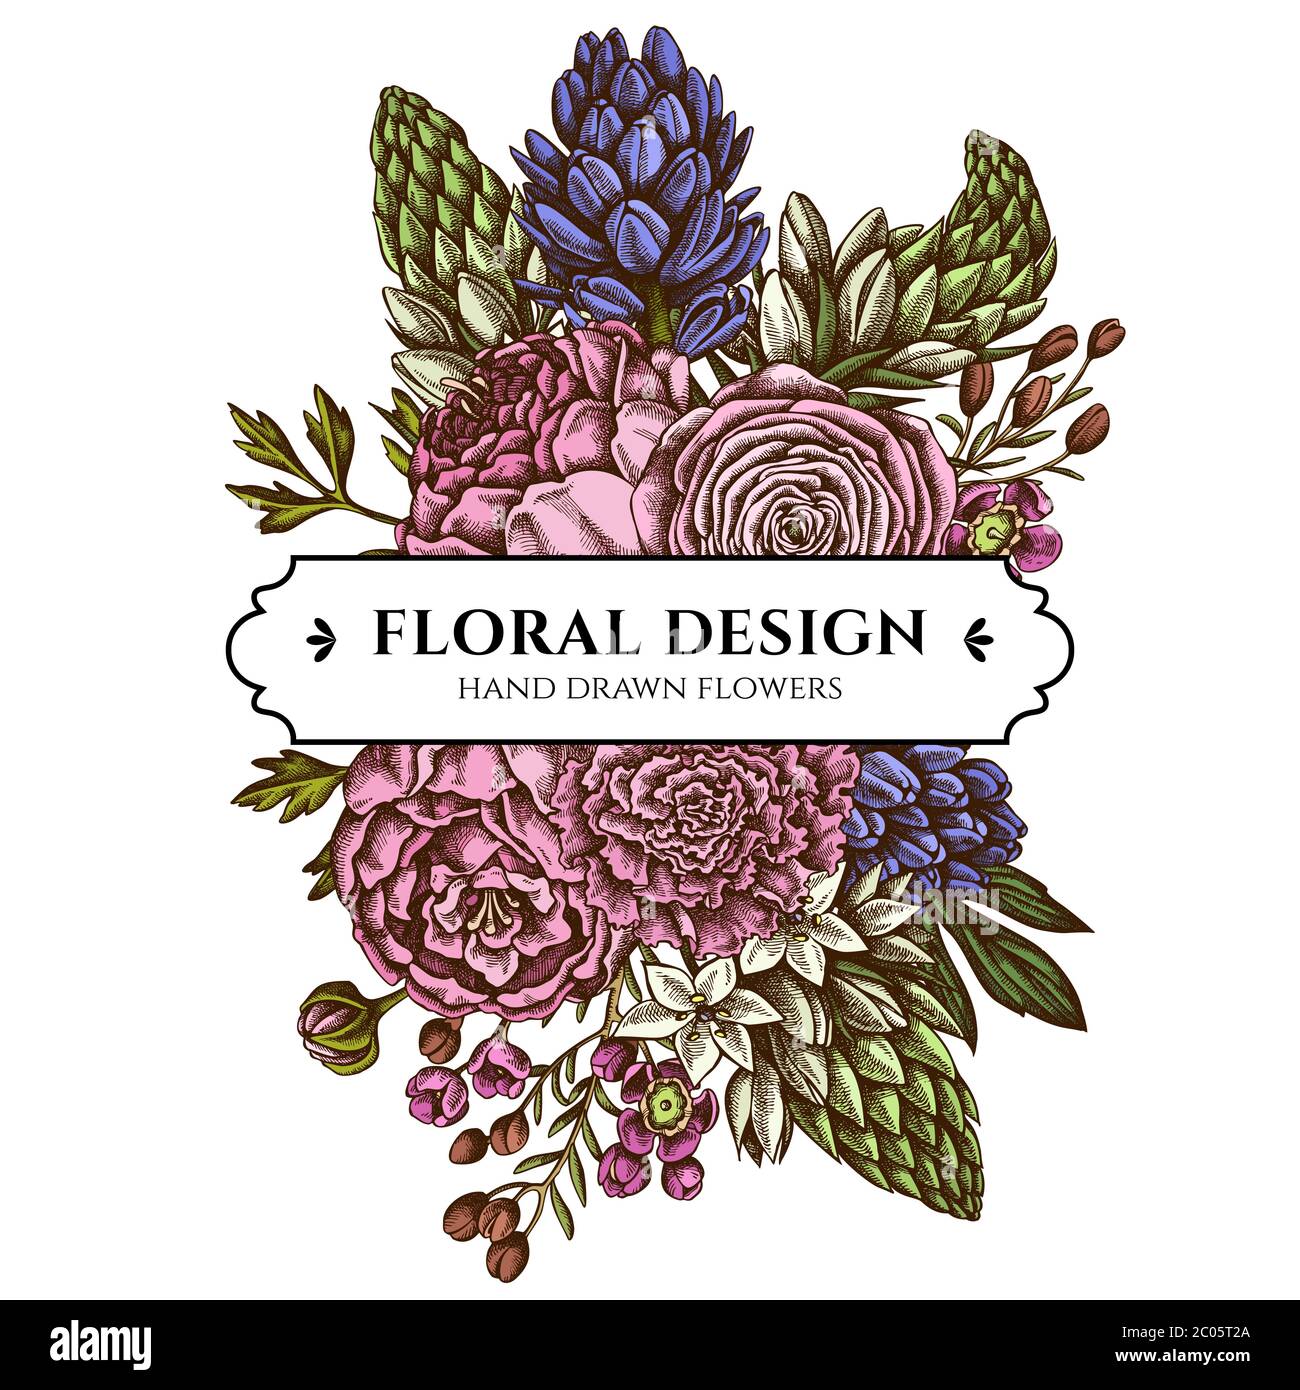 Floral bouquet design with colored peony, carnation, ranunculus, wax flower, ornithogalum, hyacinth Stock Vector